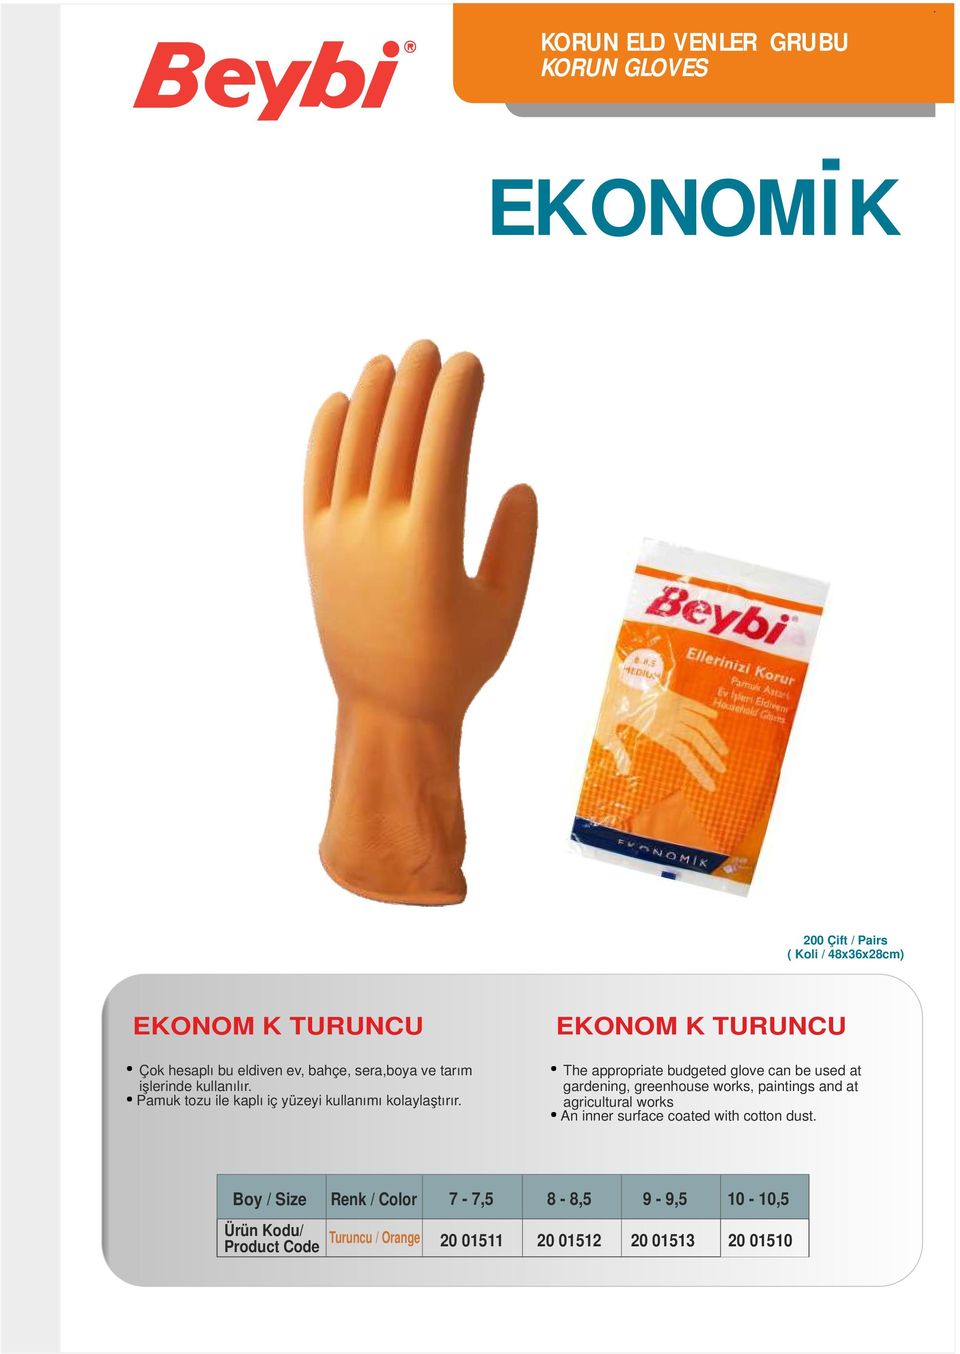 EKONOMİK TURUNCU The appropriate budgeted glove can be used at gardening, greenhouse works, paintings and at agricultural